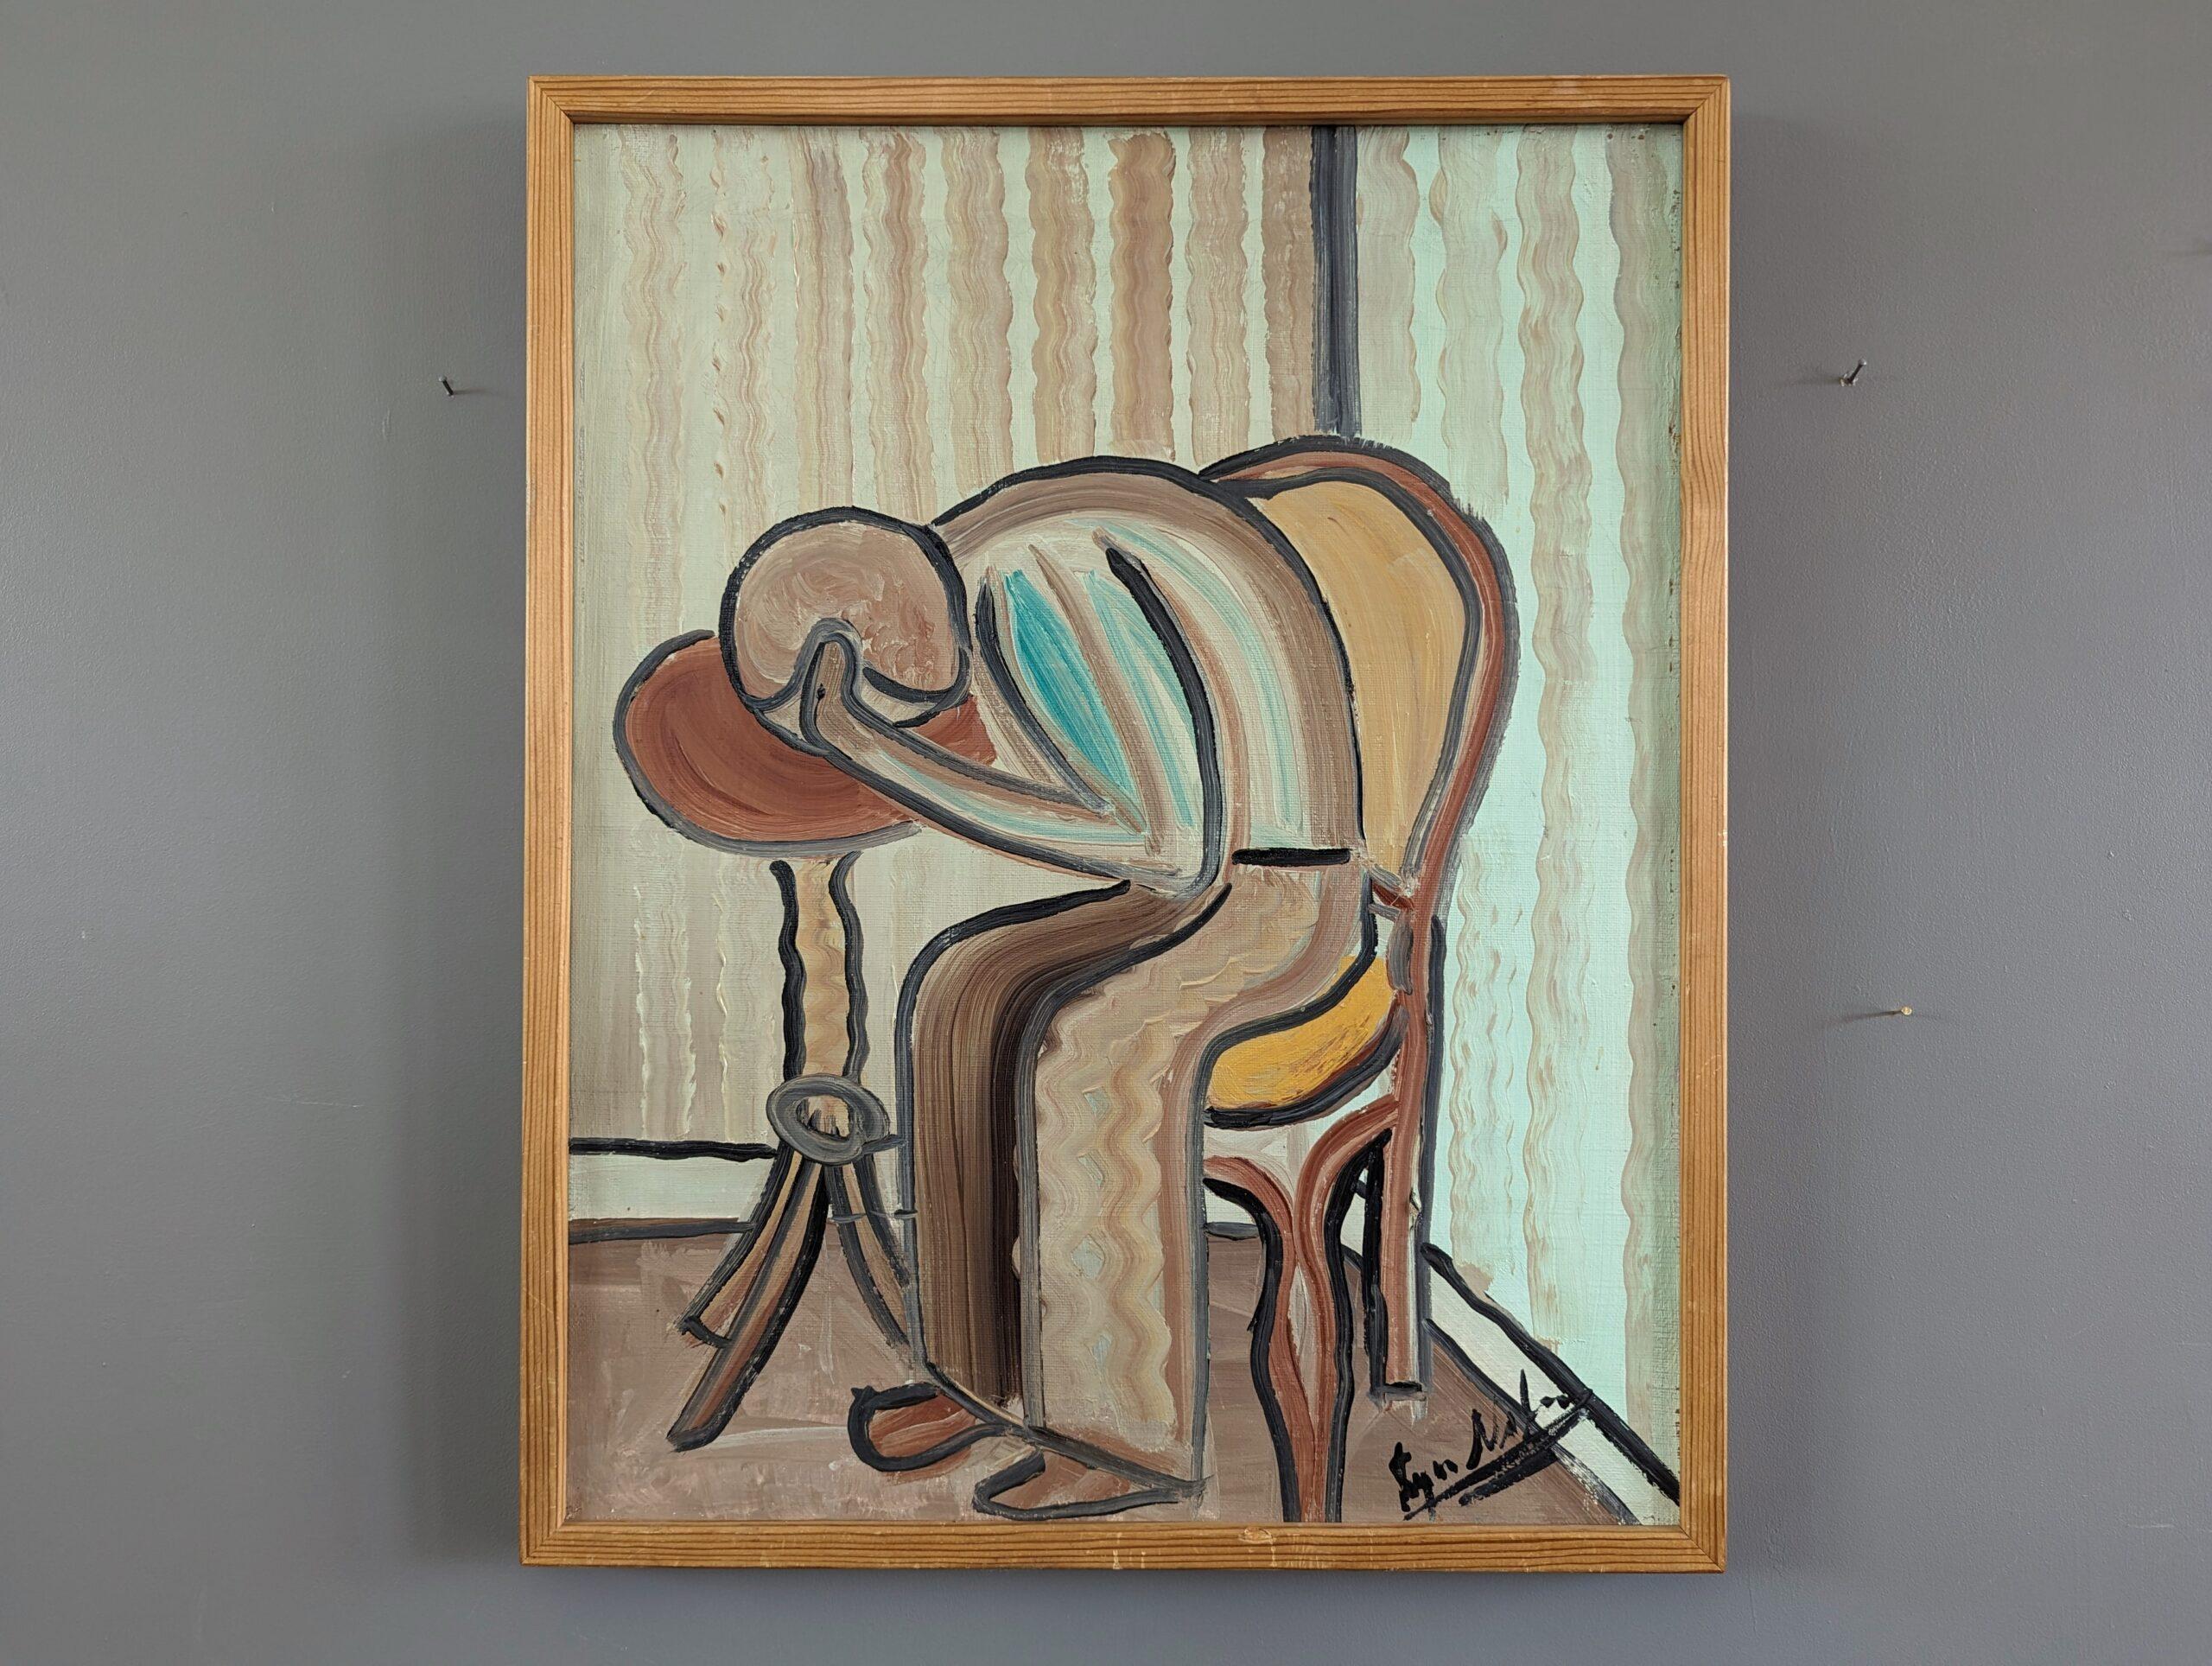 THE HUMAN CONDITION
Size: 54 x 44 cm (including frame)
Oil on canvas

A wonderfully executed mid-century composition that portrays a poignant scene within the confines of an interior setting, painted in oil onto canvas.

The central figure, slouched